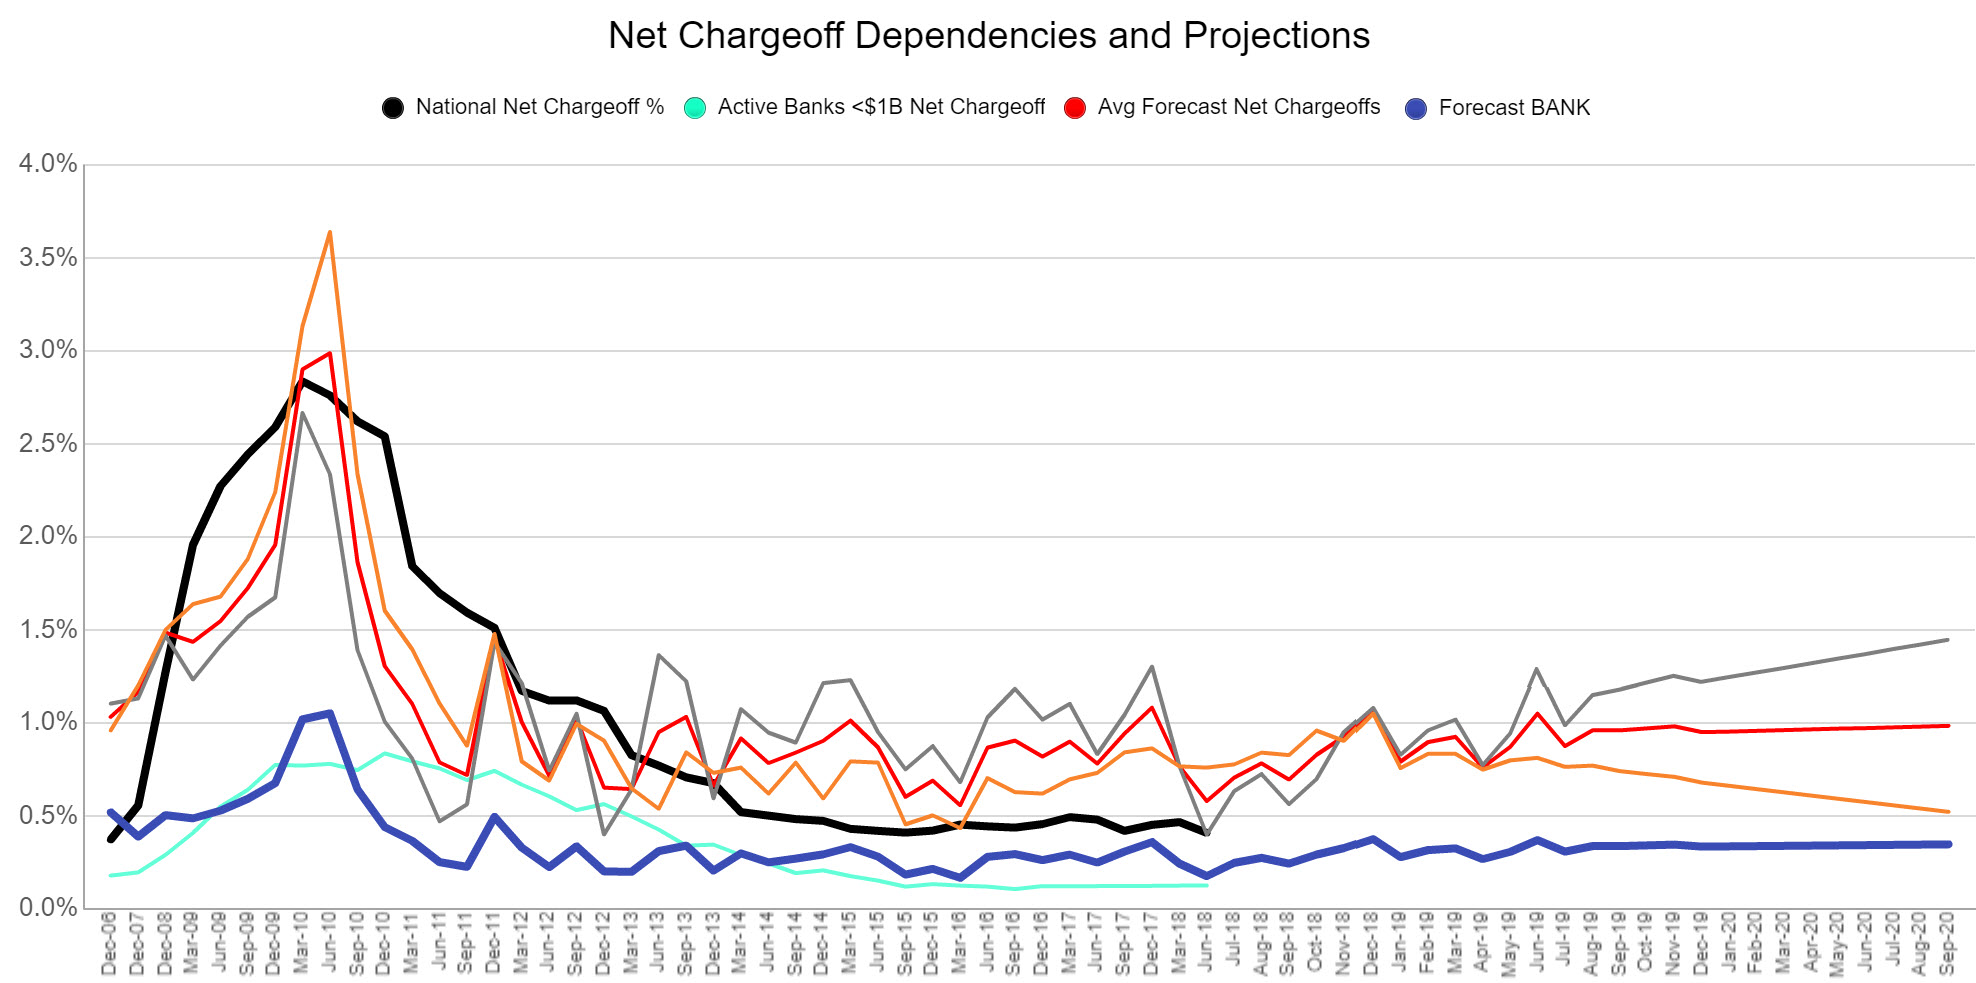 CECL Net Chargeoff Dependencies and Projections